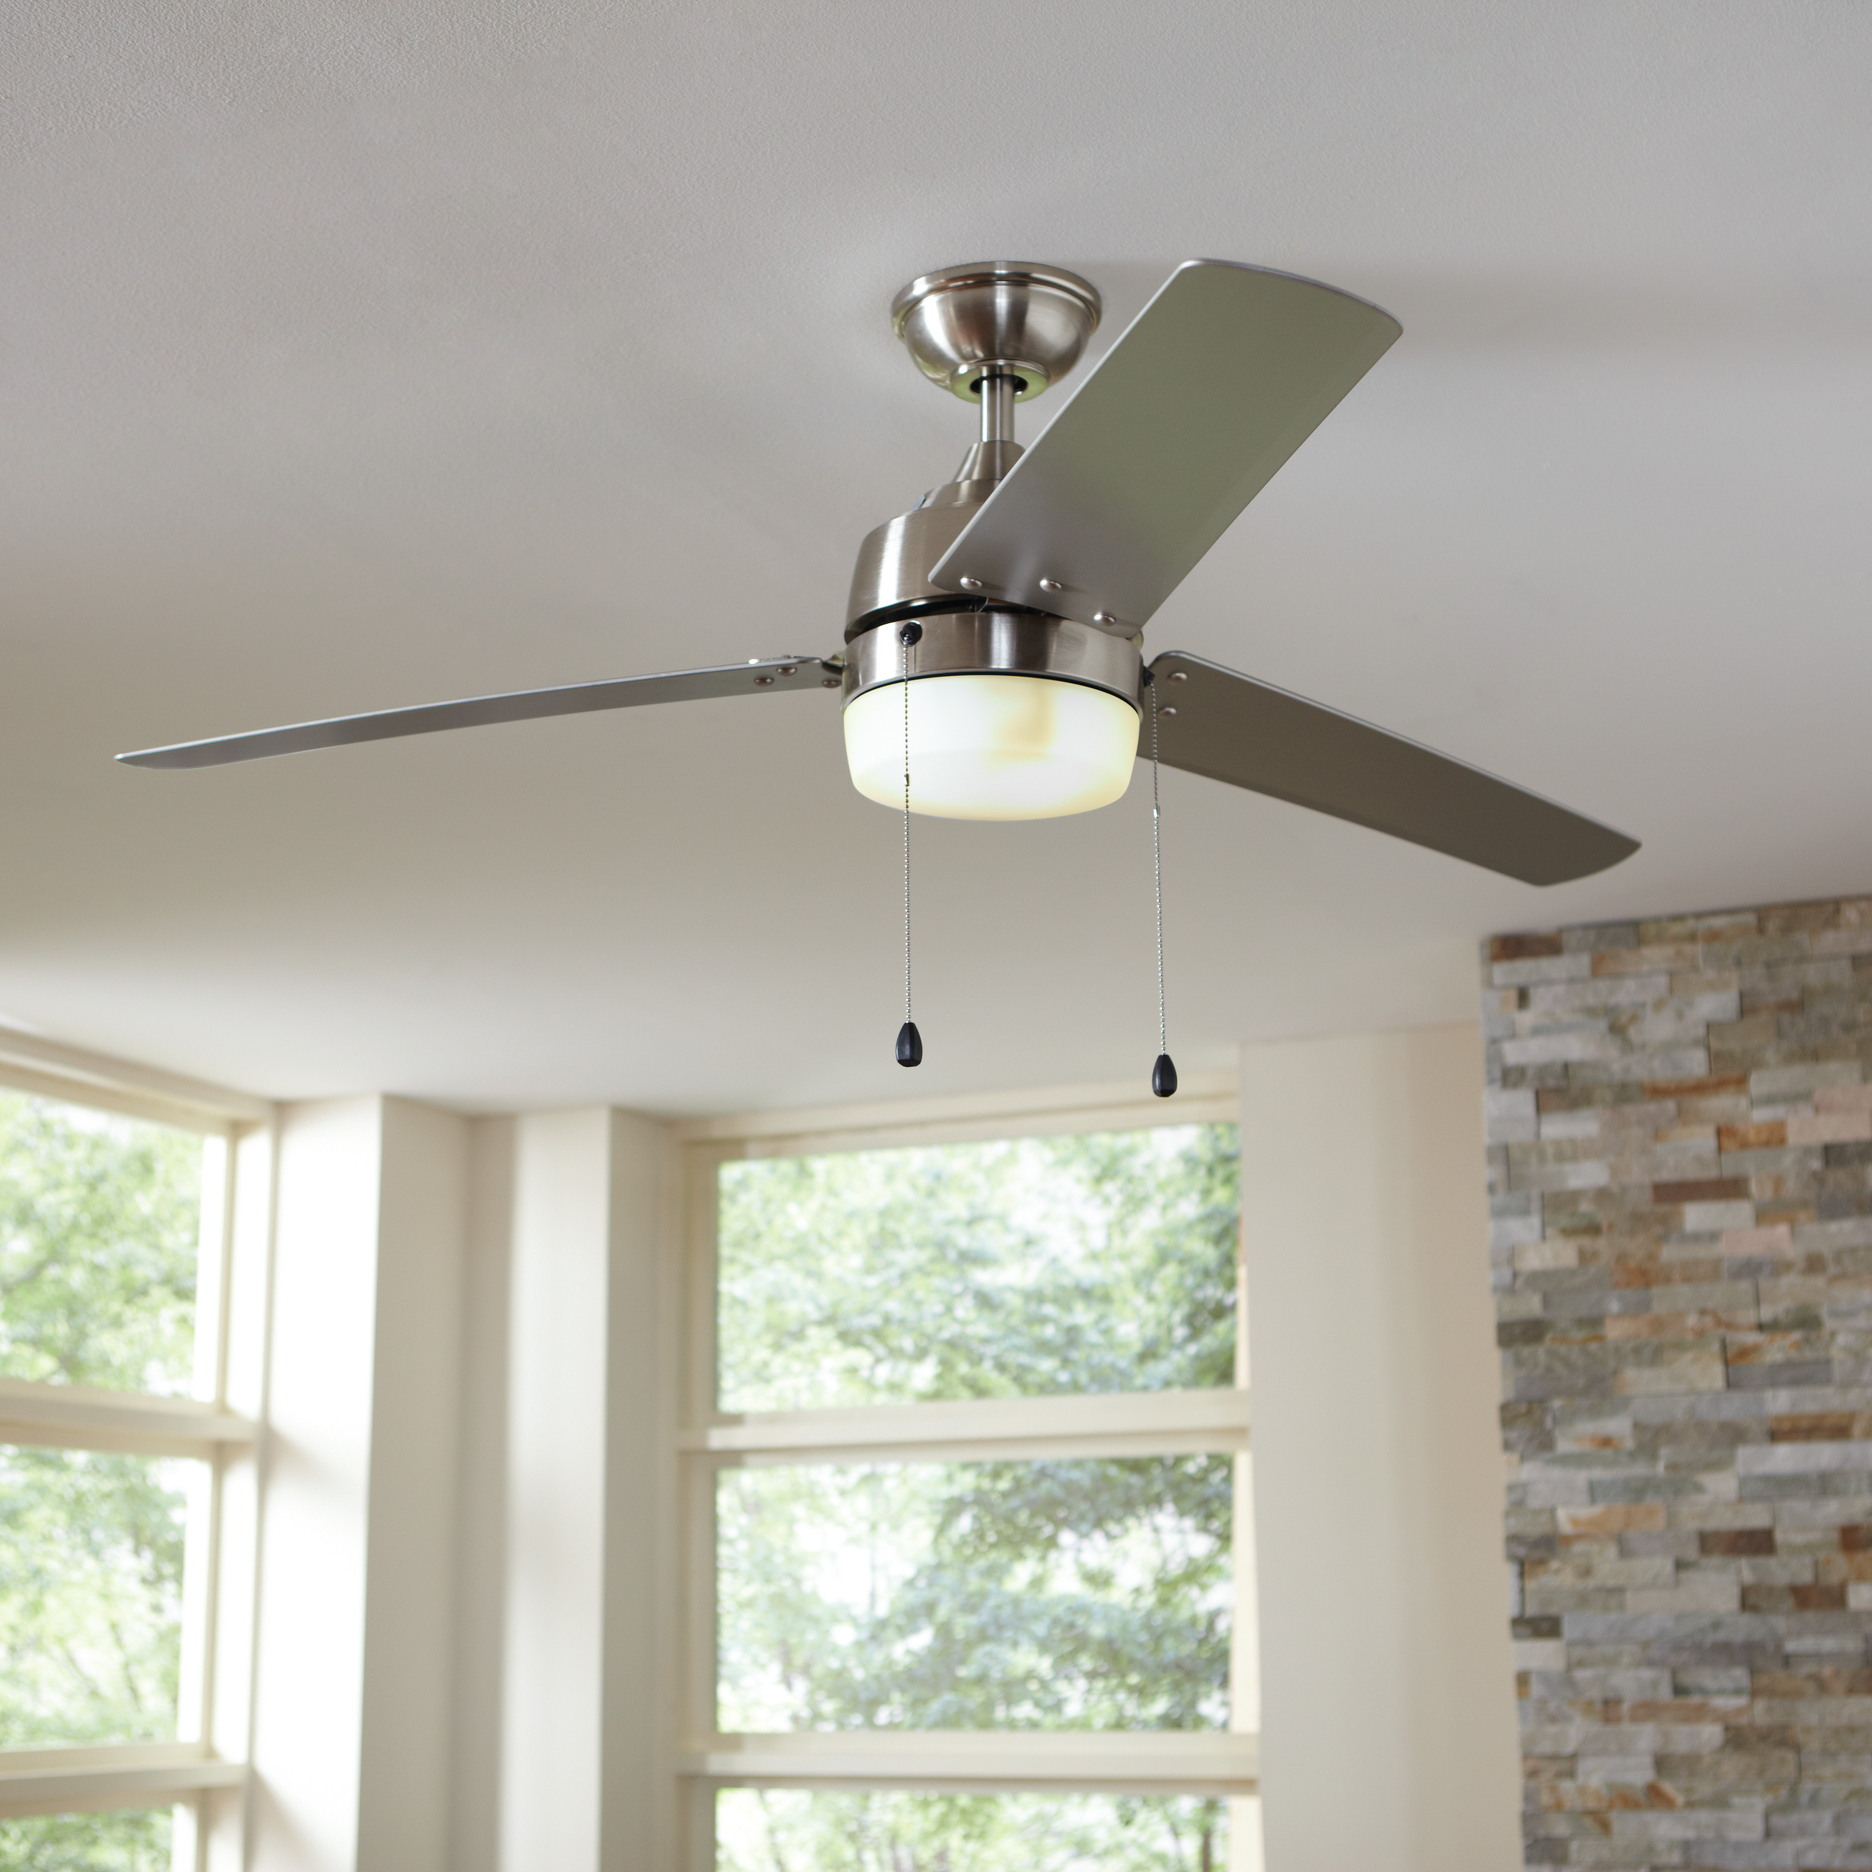 Do Ceiling Fans Cool Your House – HBM Blog